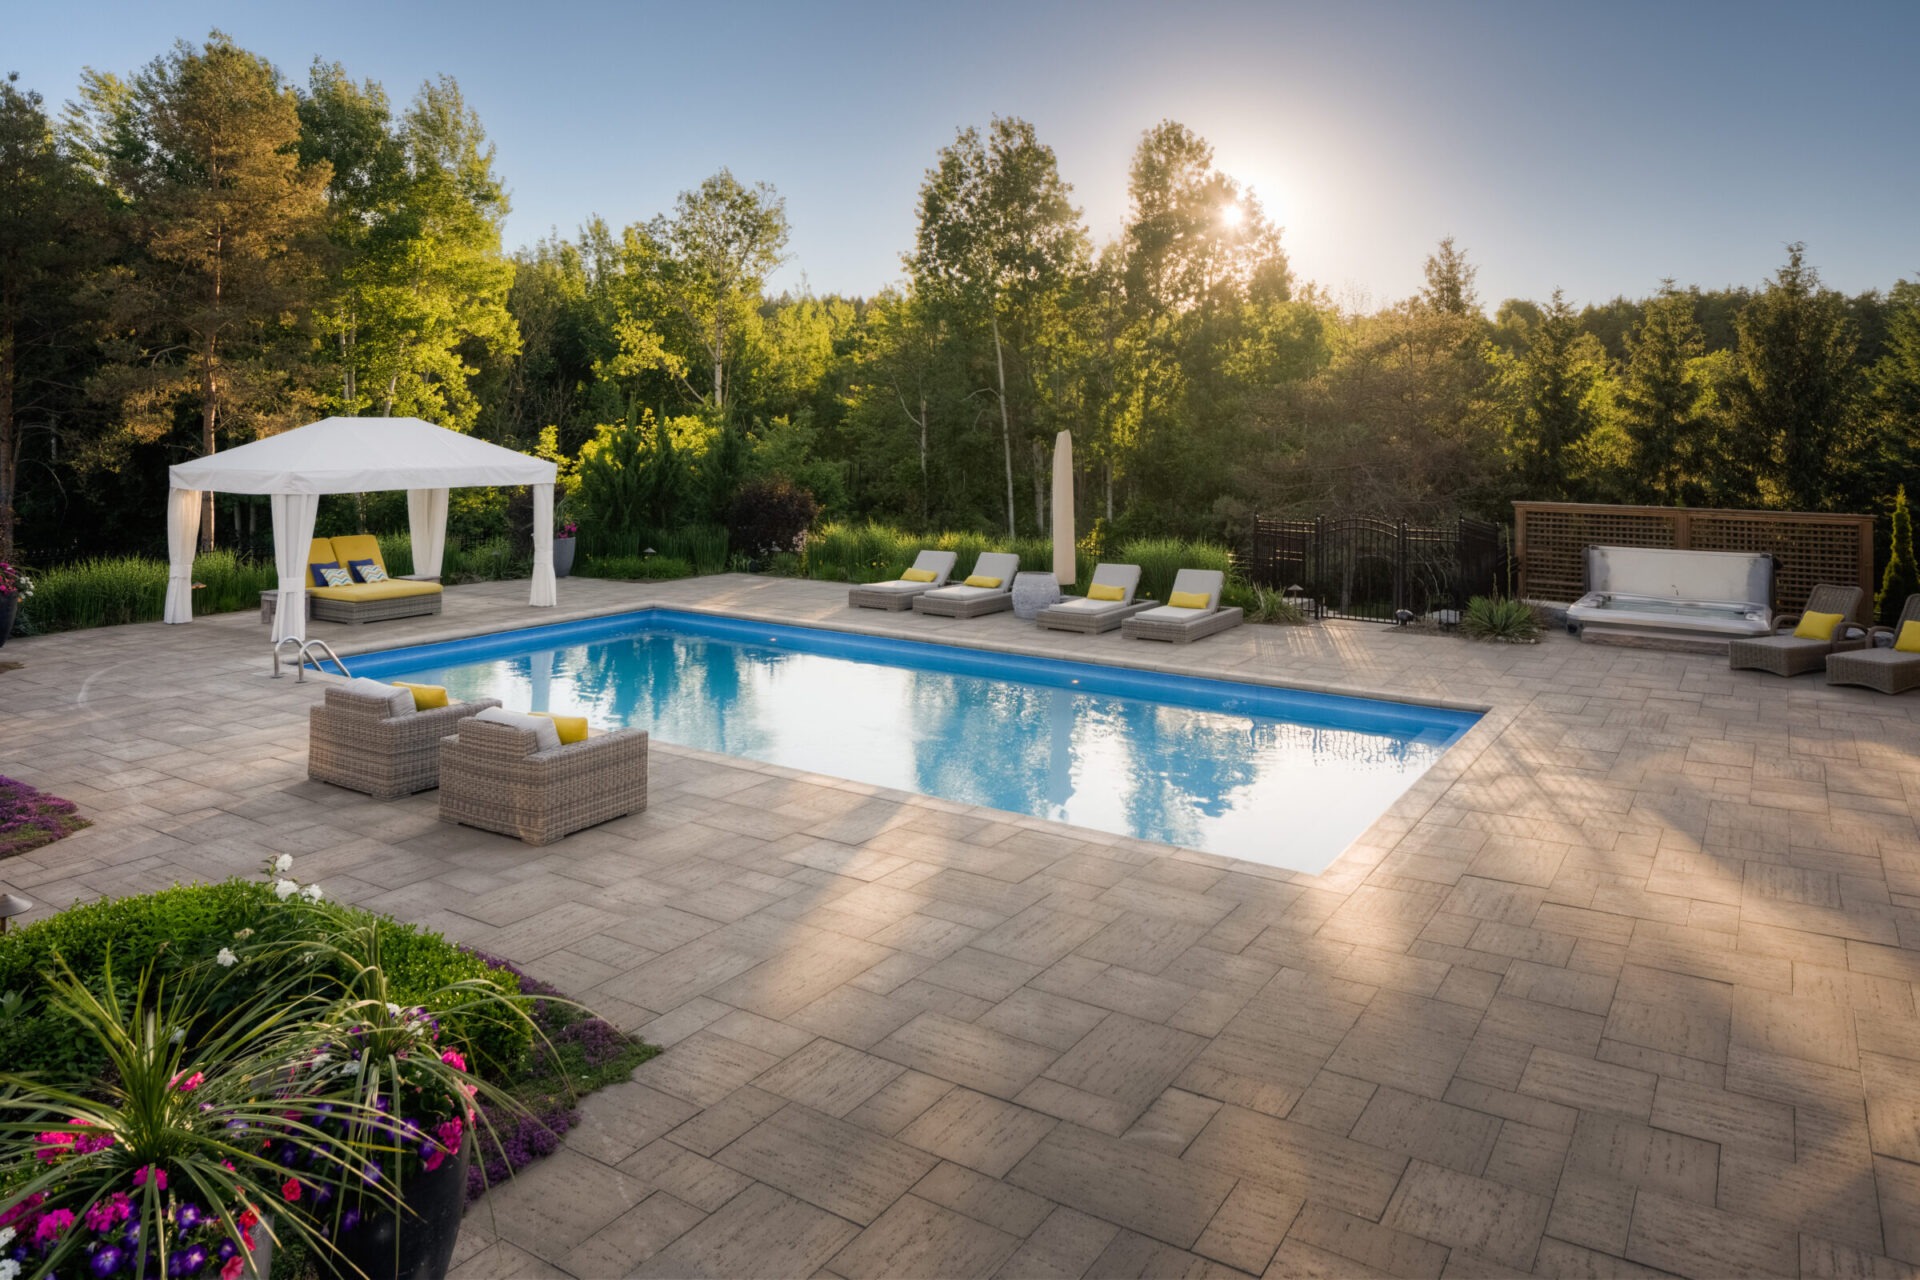 The image features a tranquil backyard with a rectangular swimming pool, loungers, an elegant gazebo, hot tub, and a patio, surrounded by lush greenery at sunset.